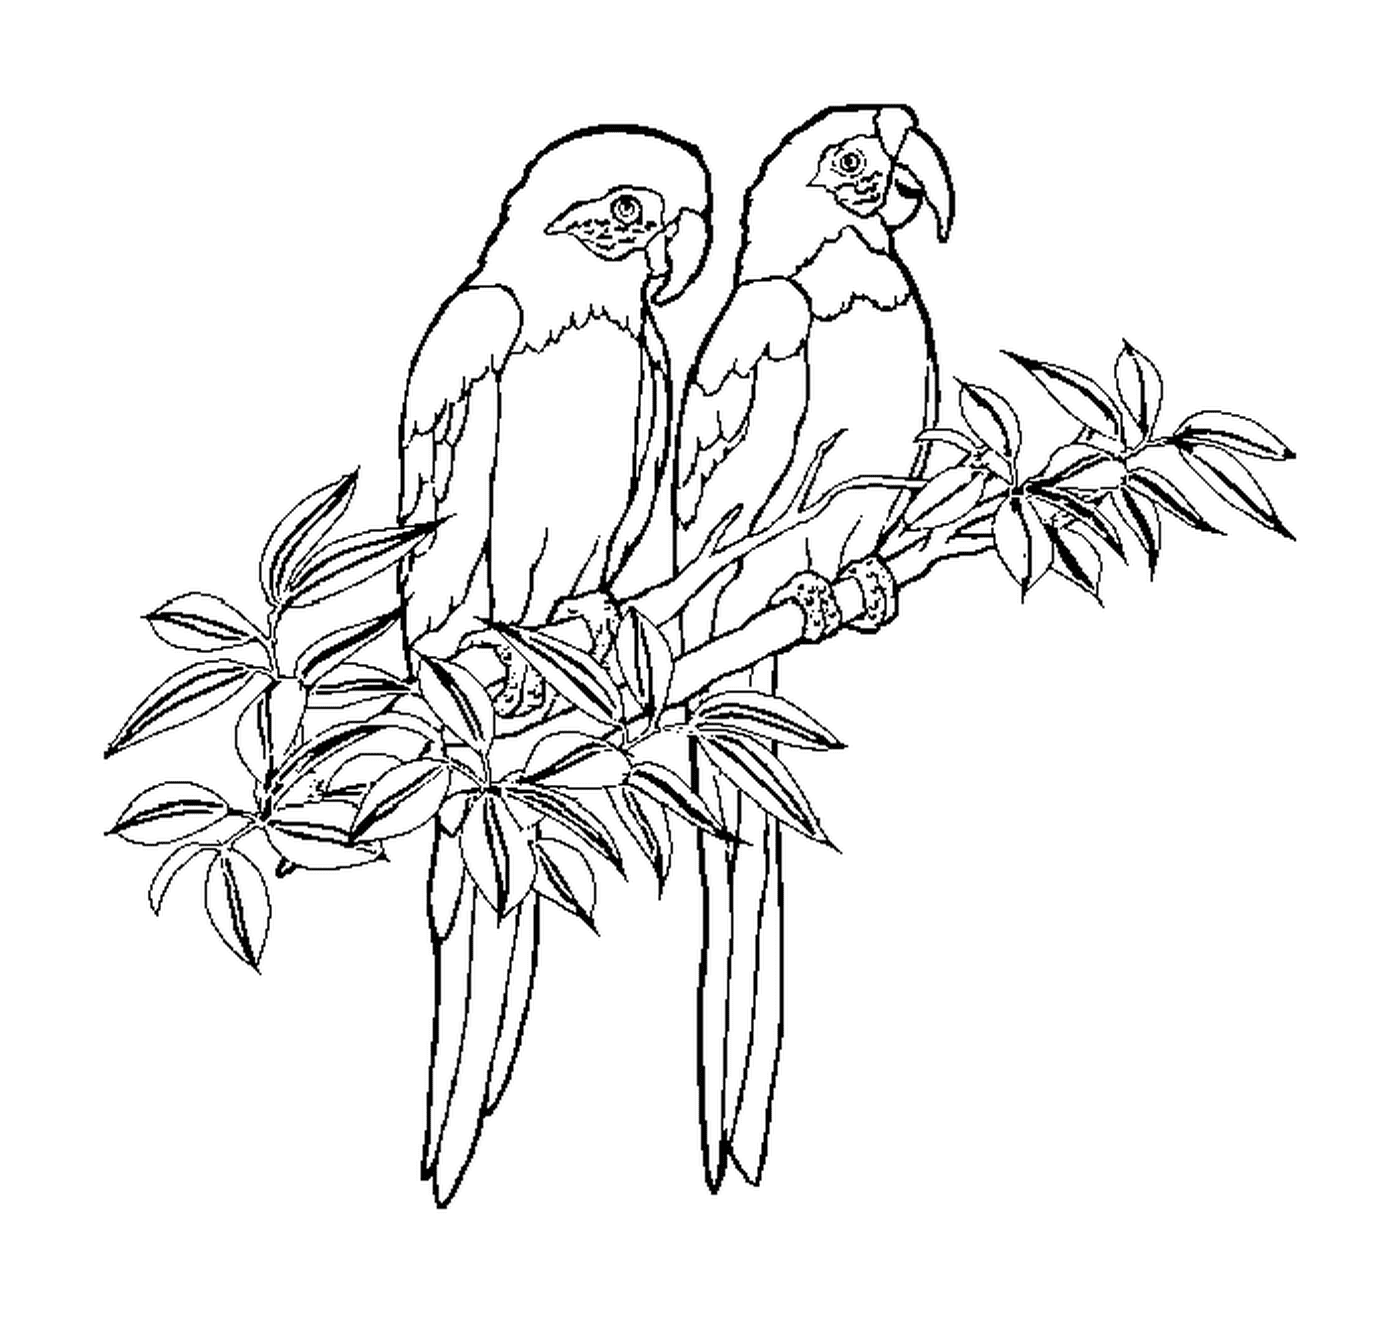  Two parrots perched together 